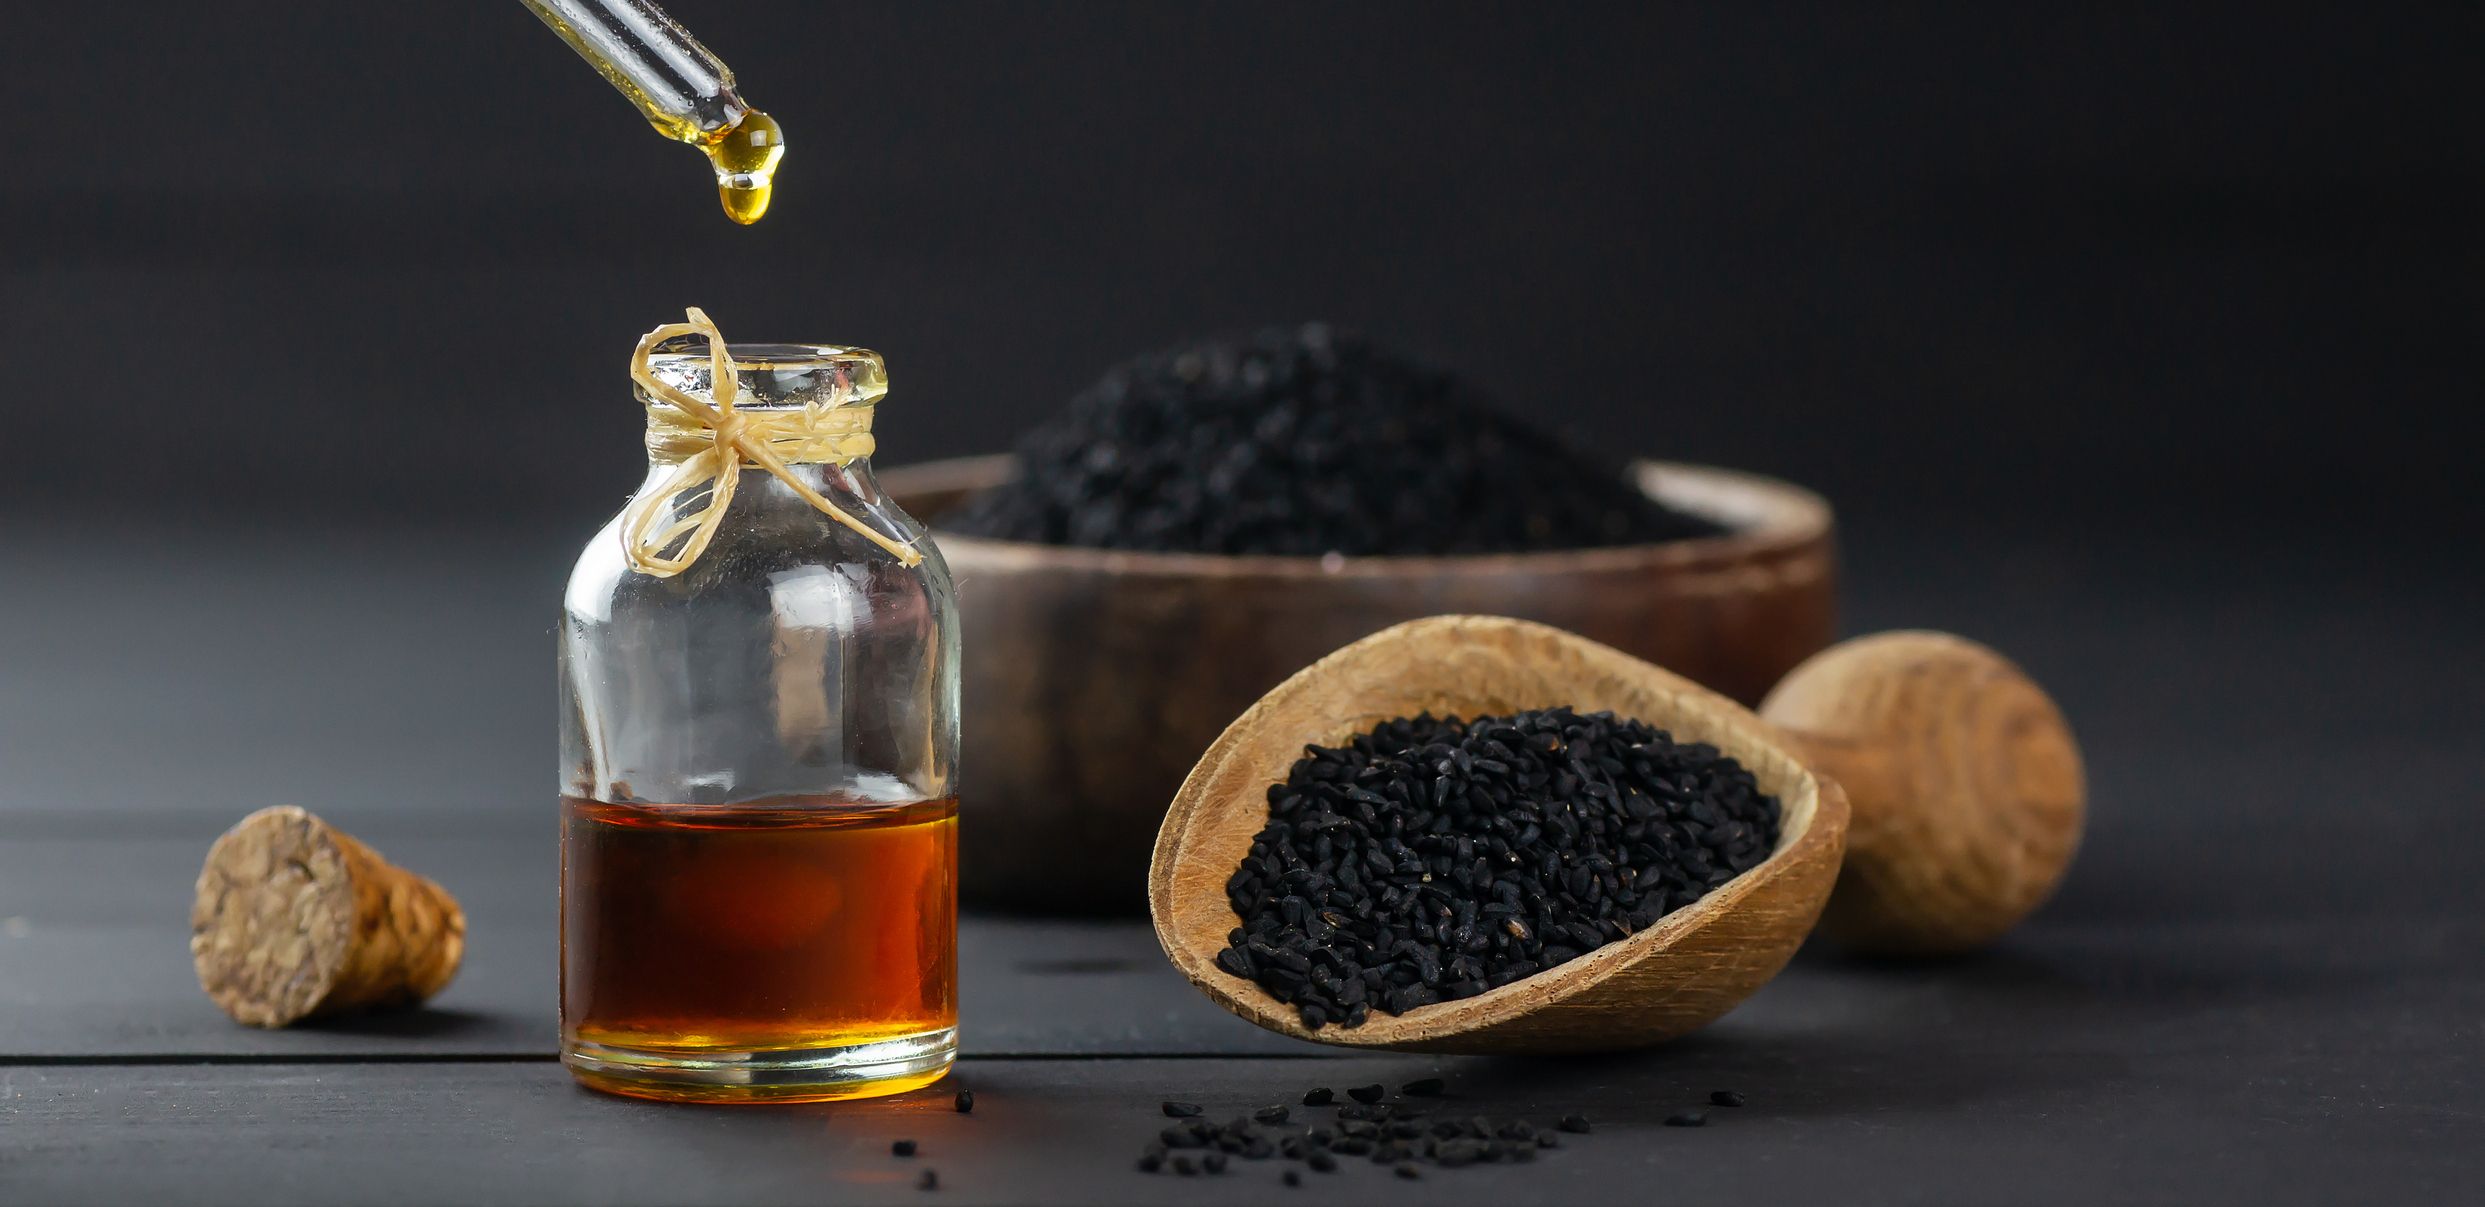 How to use Black Seed Oil for Improved Health and Beauty